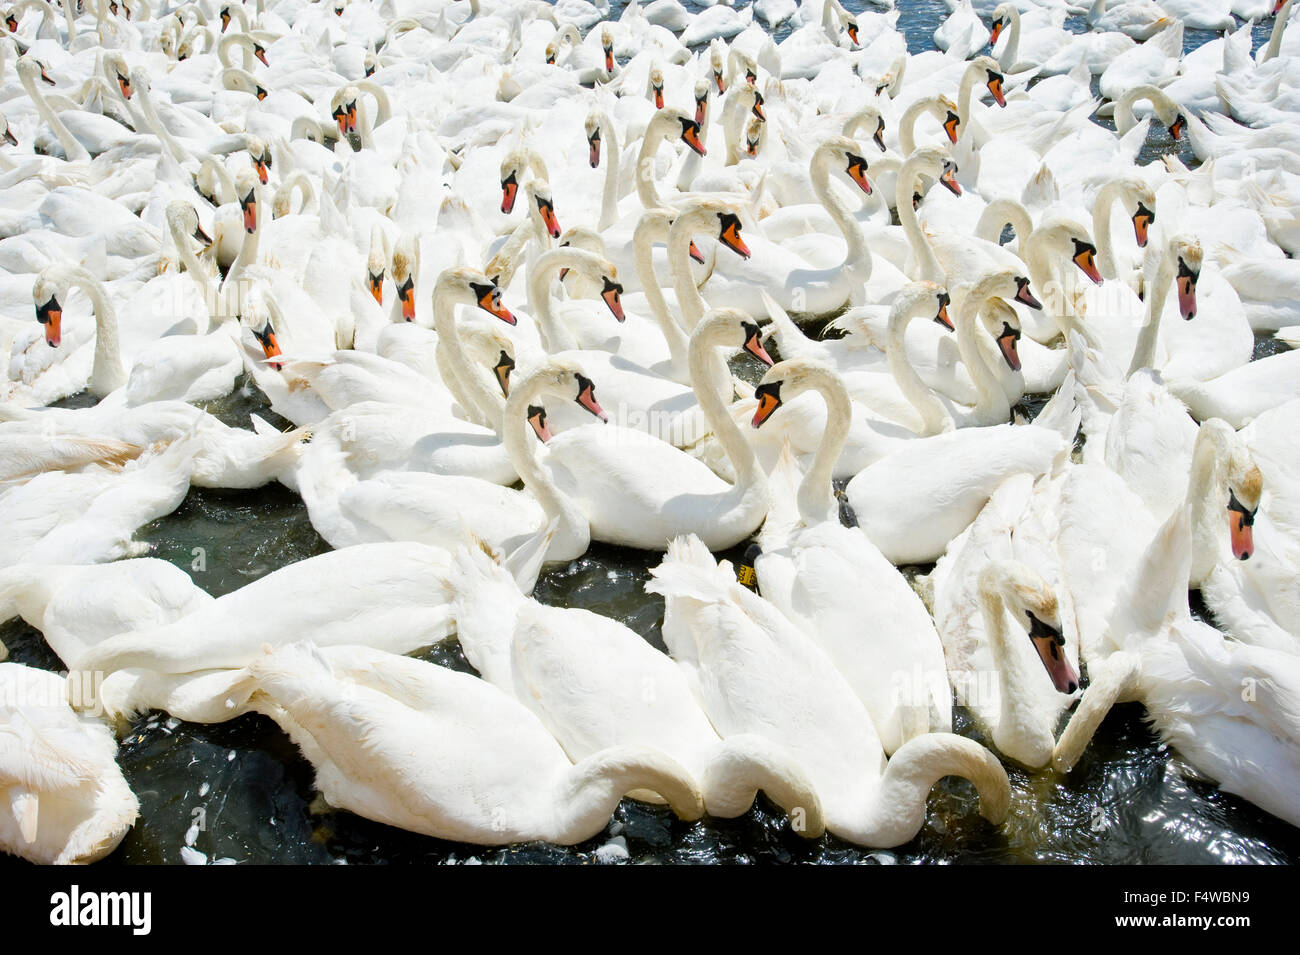 An image showing the swans at the Abbotsbury swan sanctuary in Dorset at feeding time. Stock Photo